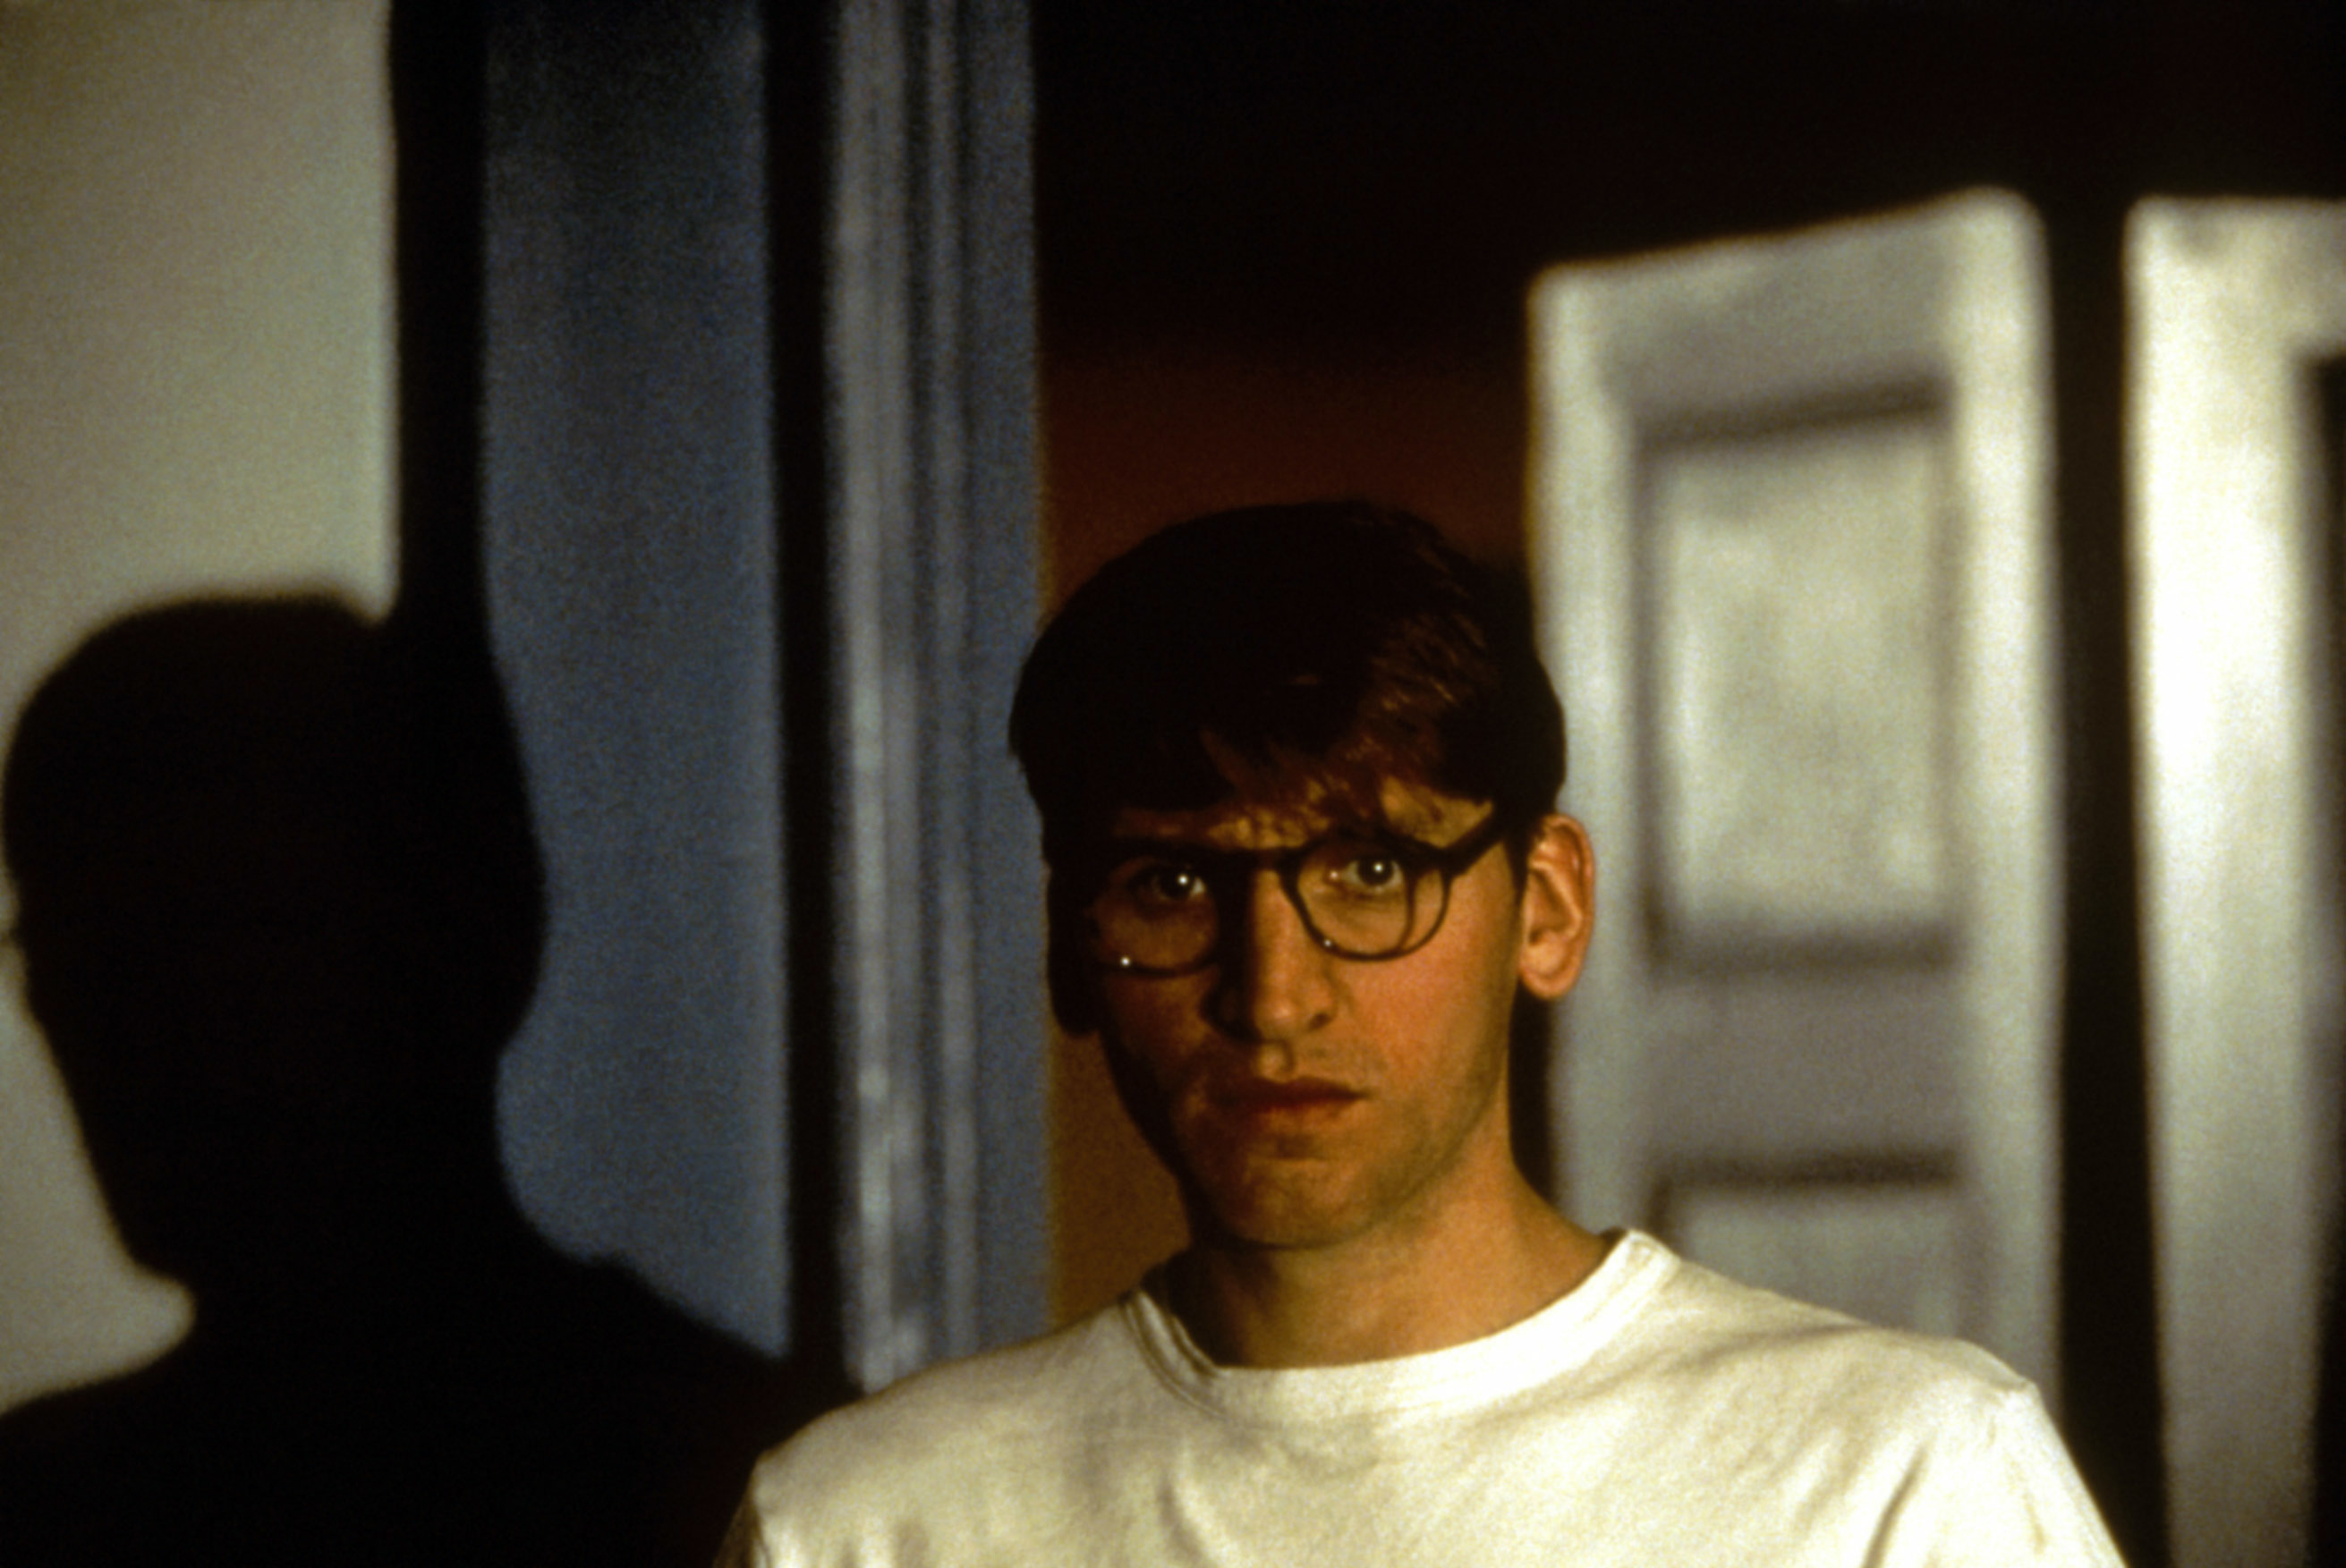 A young man with brown hair and thick glasses, looks out suspiciously a doorway.